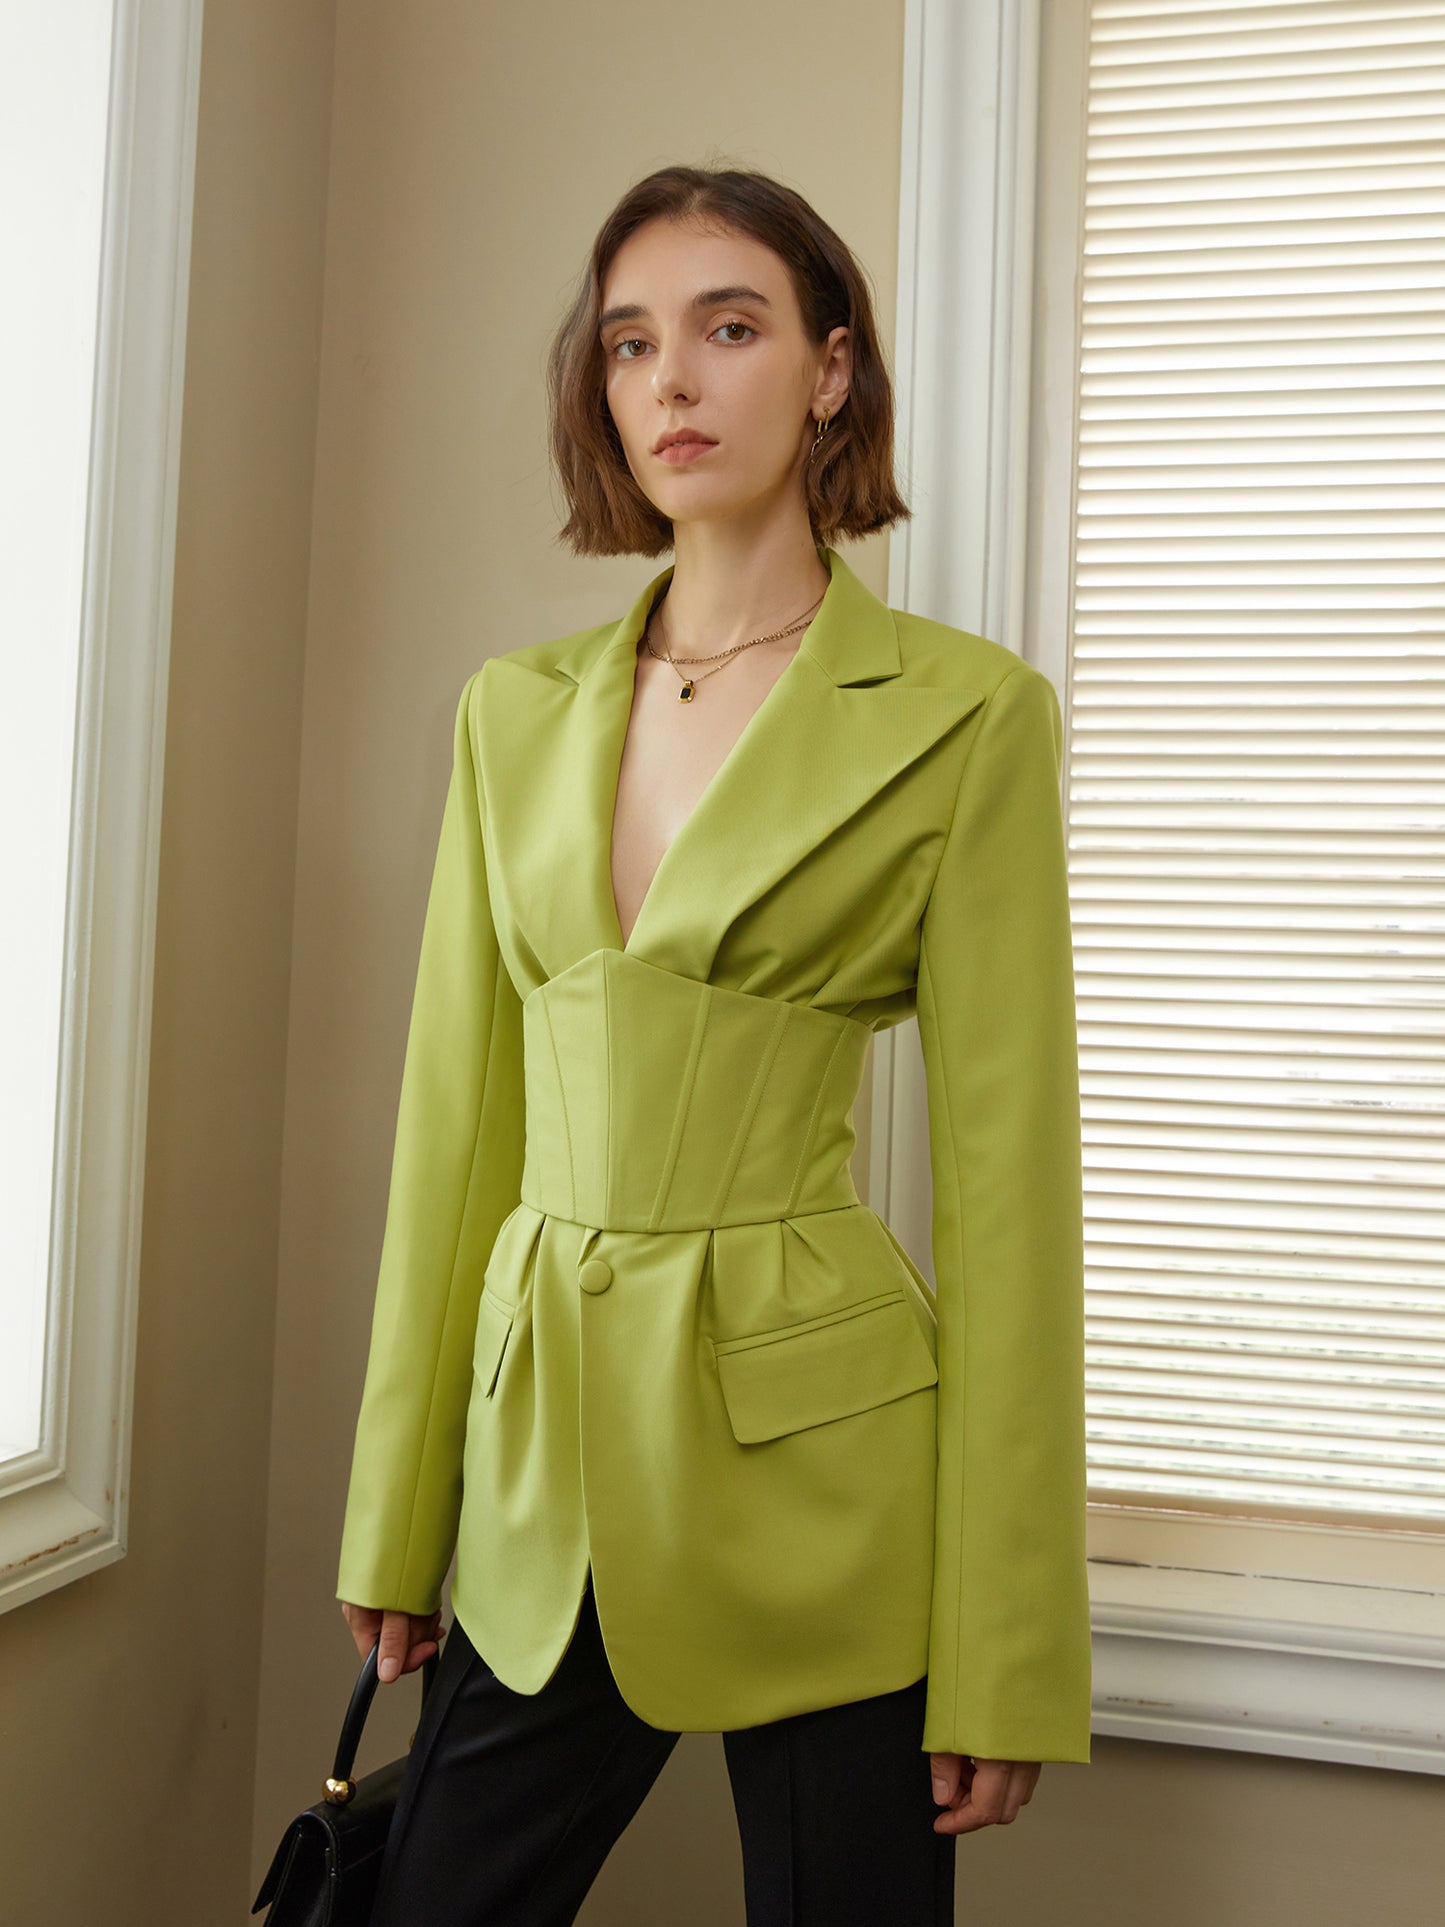 Waist V-neck suit jacket is a one-button with girdle, long sleeves, and early spring green blazer- Dedta